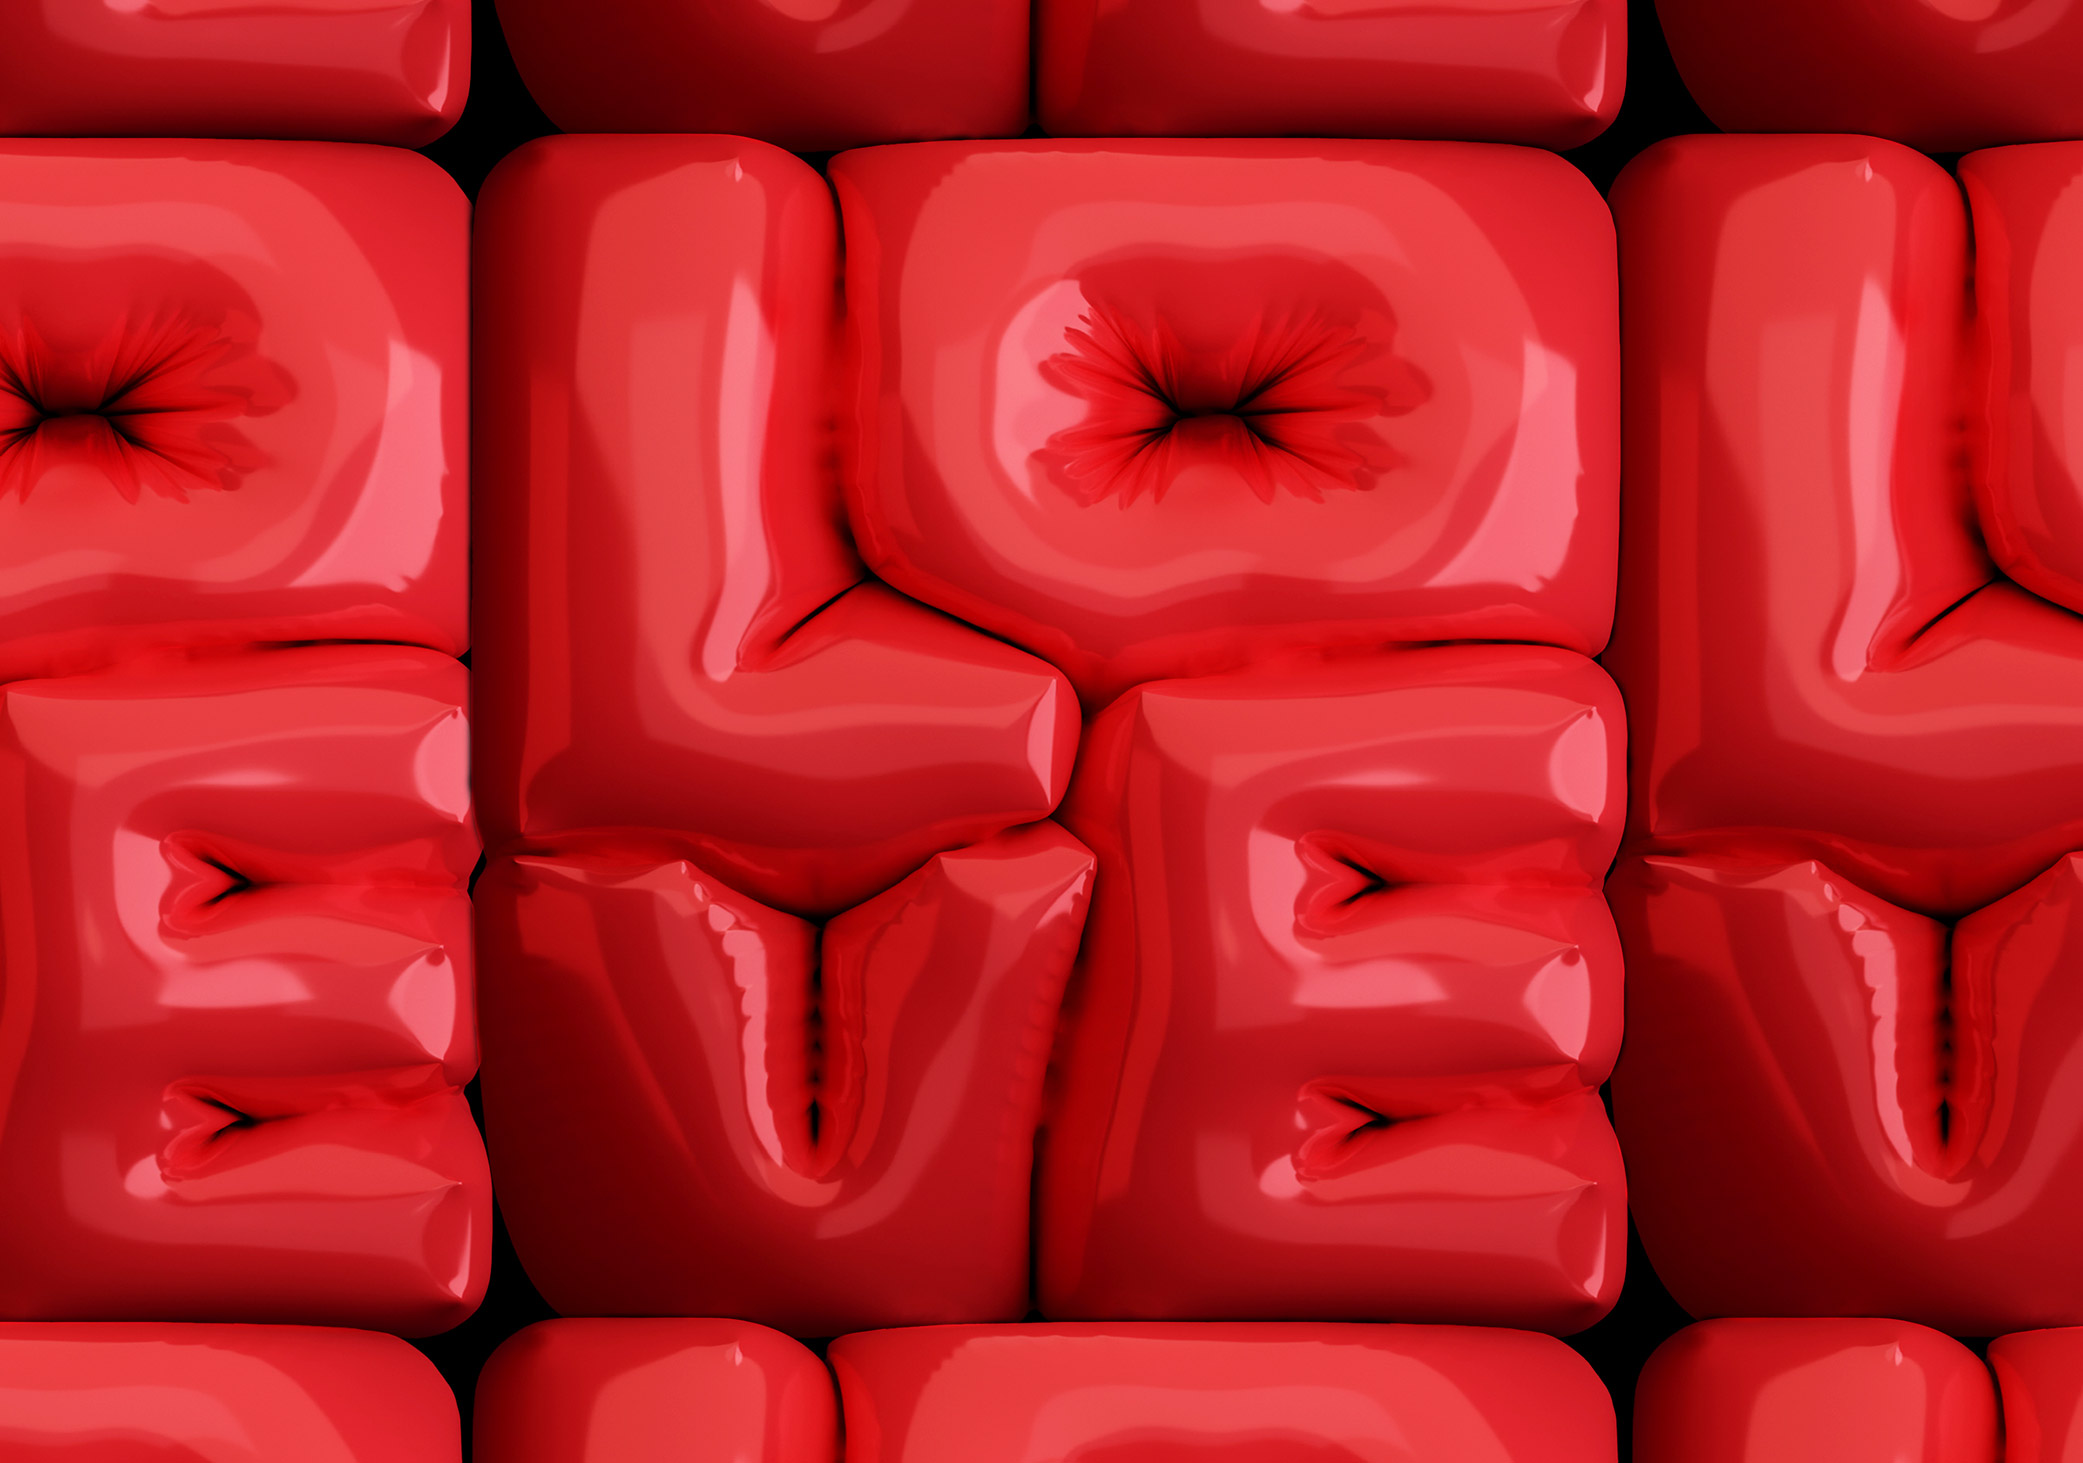 3D rendered design using the word Love in an inflated style and a red rubber texture